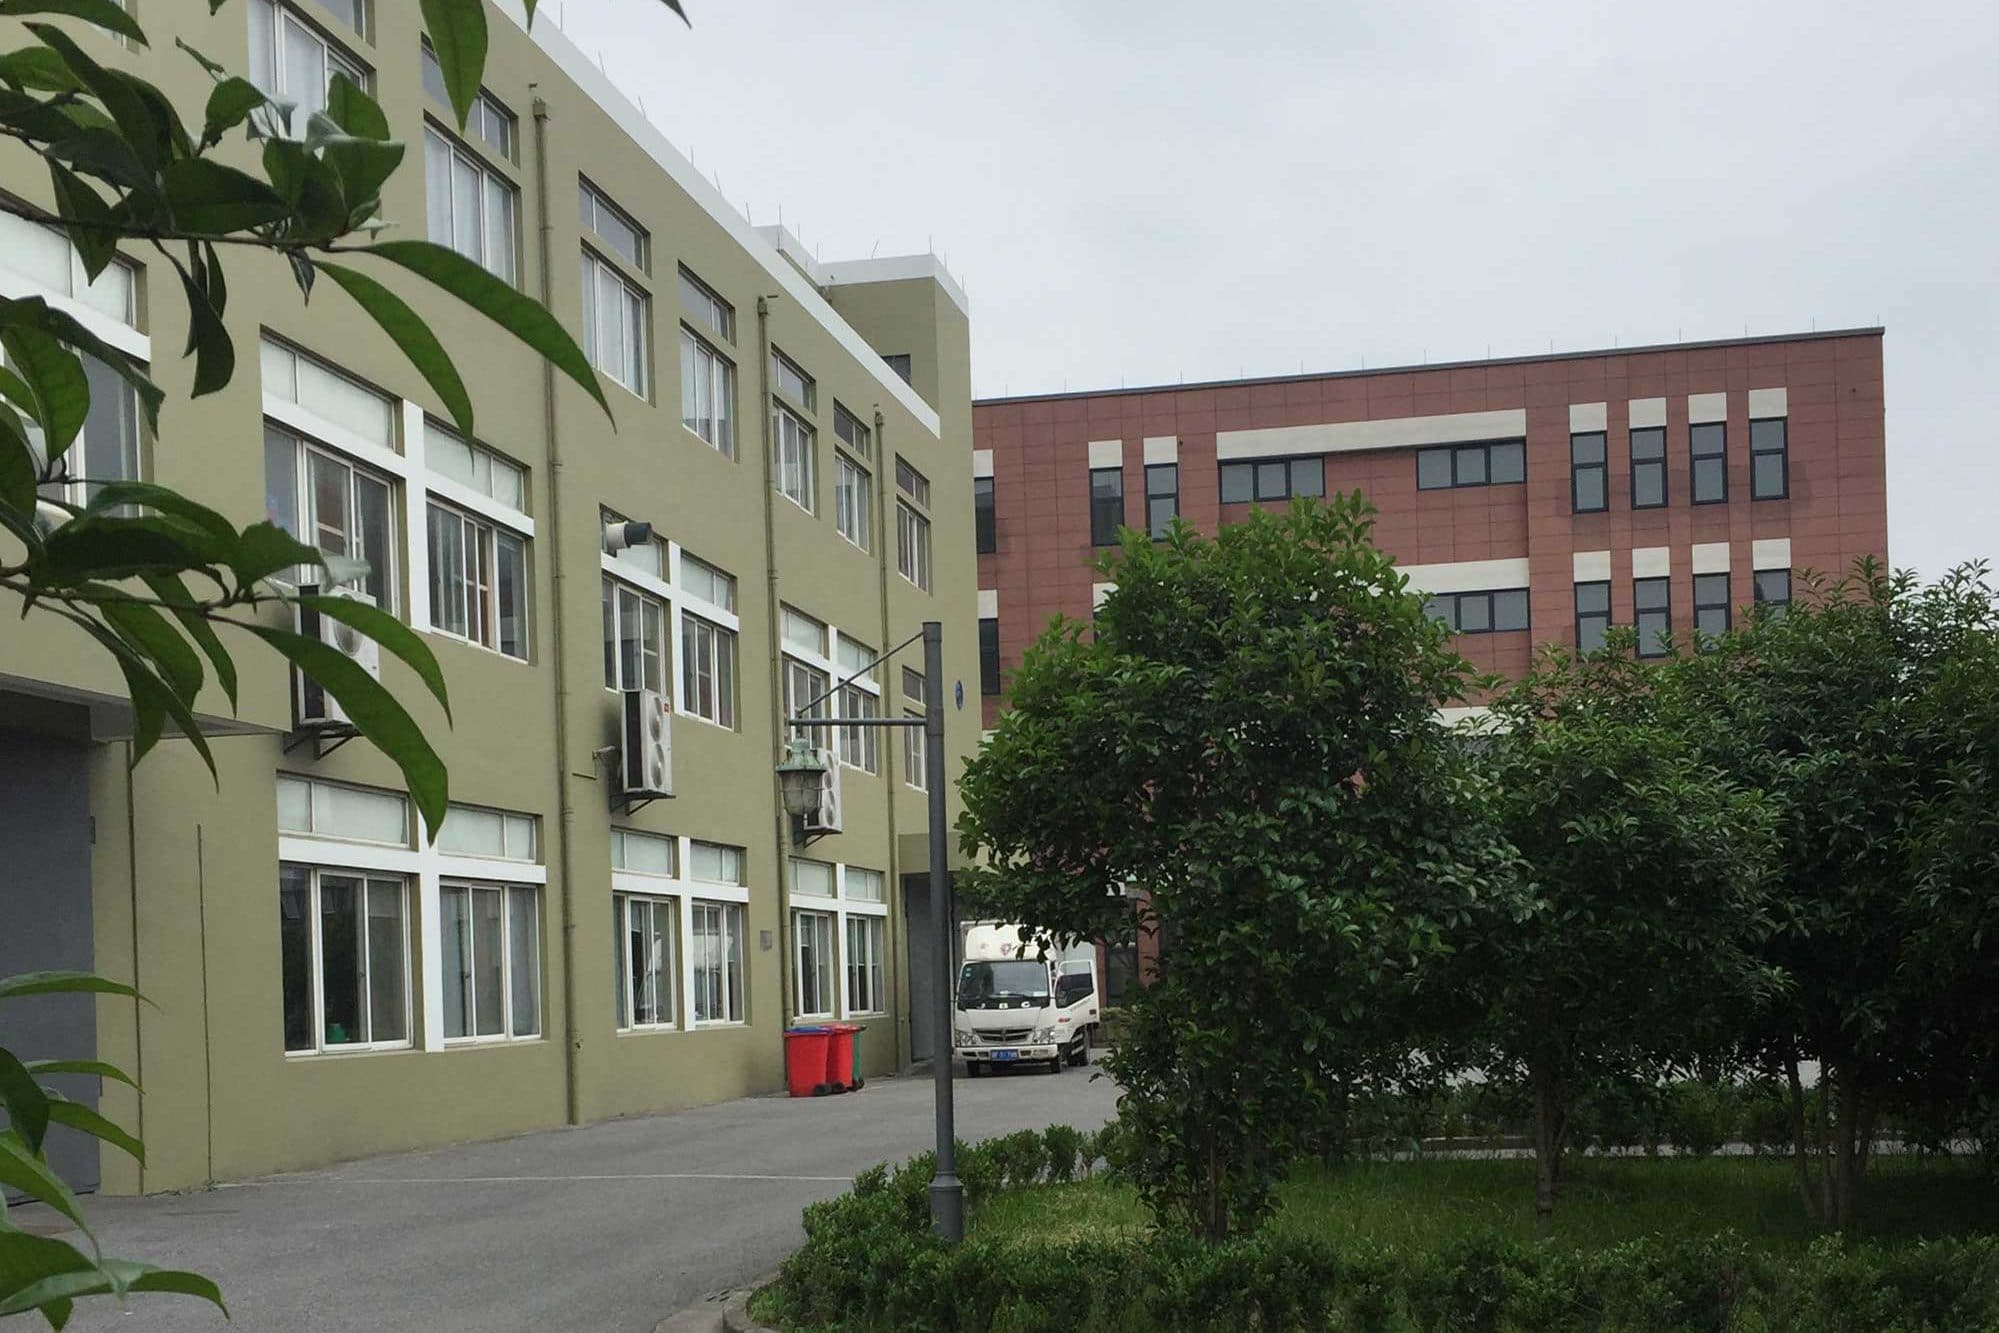 Successfully obtained through auction the right of use of 19,971 square meters of land located in the Industrial Zone, Xinfeng Town, Nanhu District of Jiaxing City